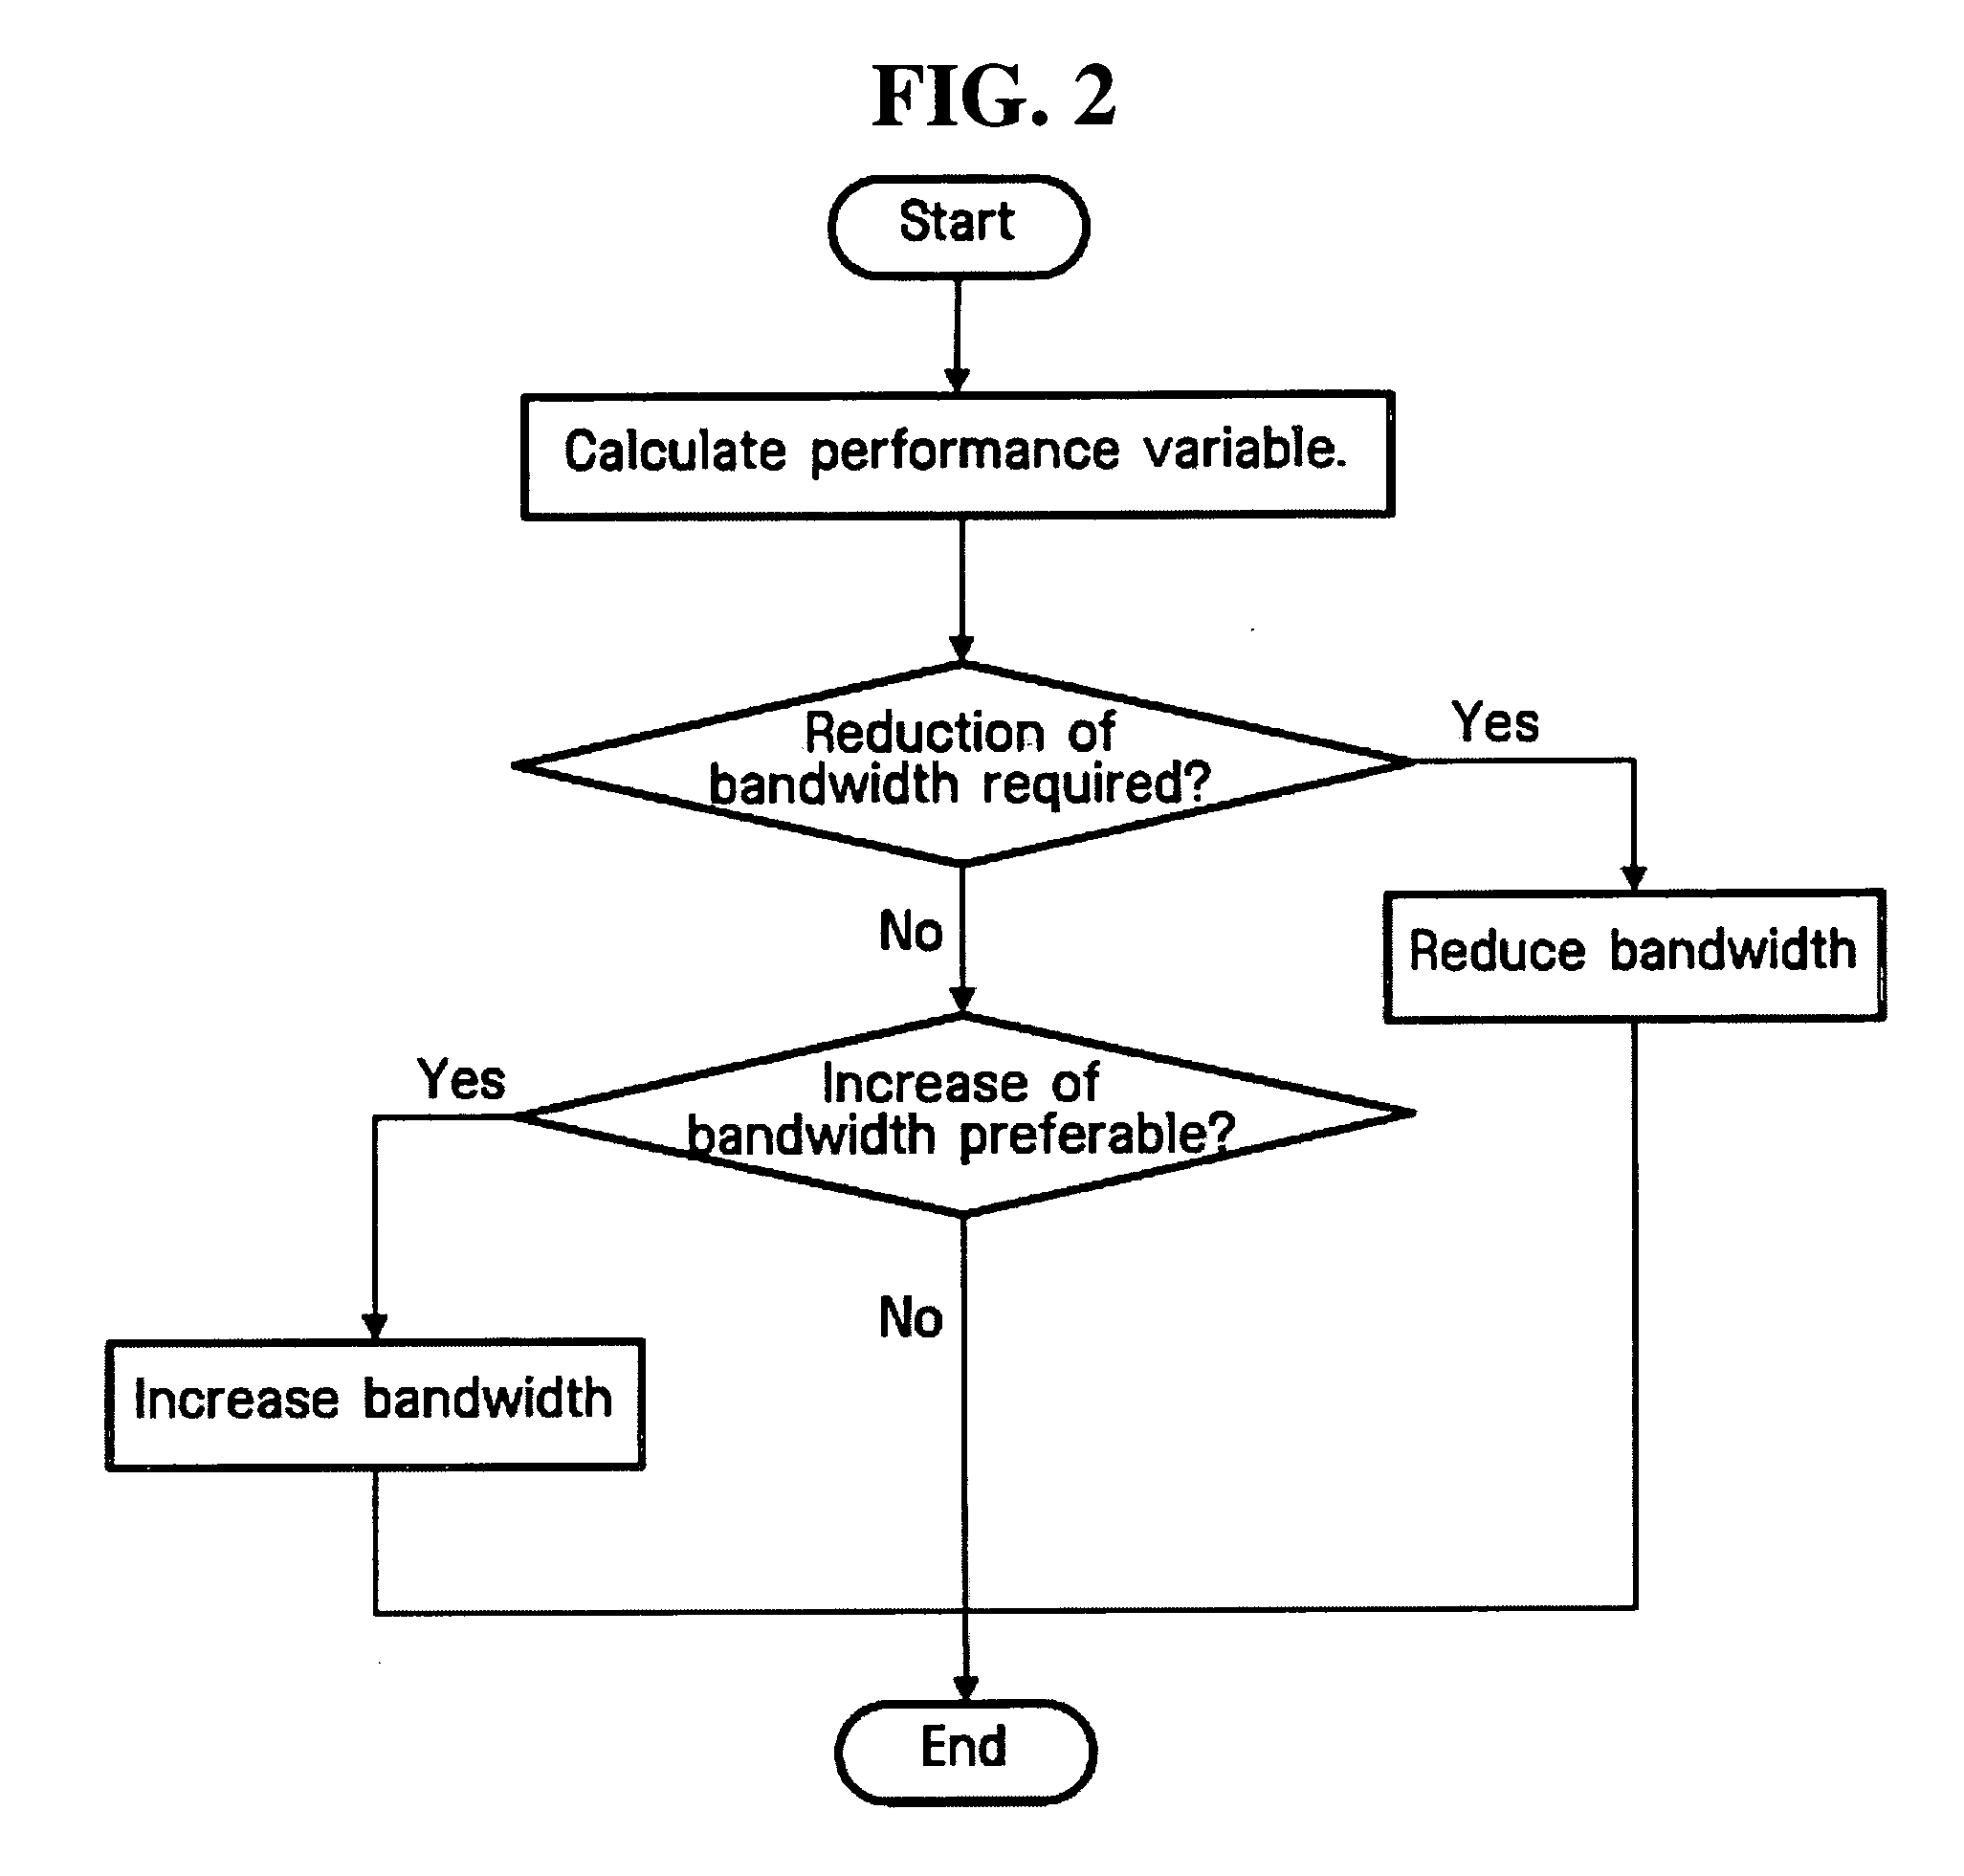 Client for video stream play and method thereof